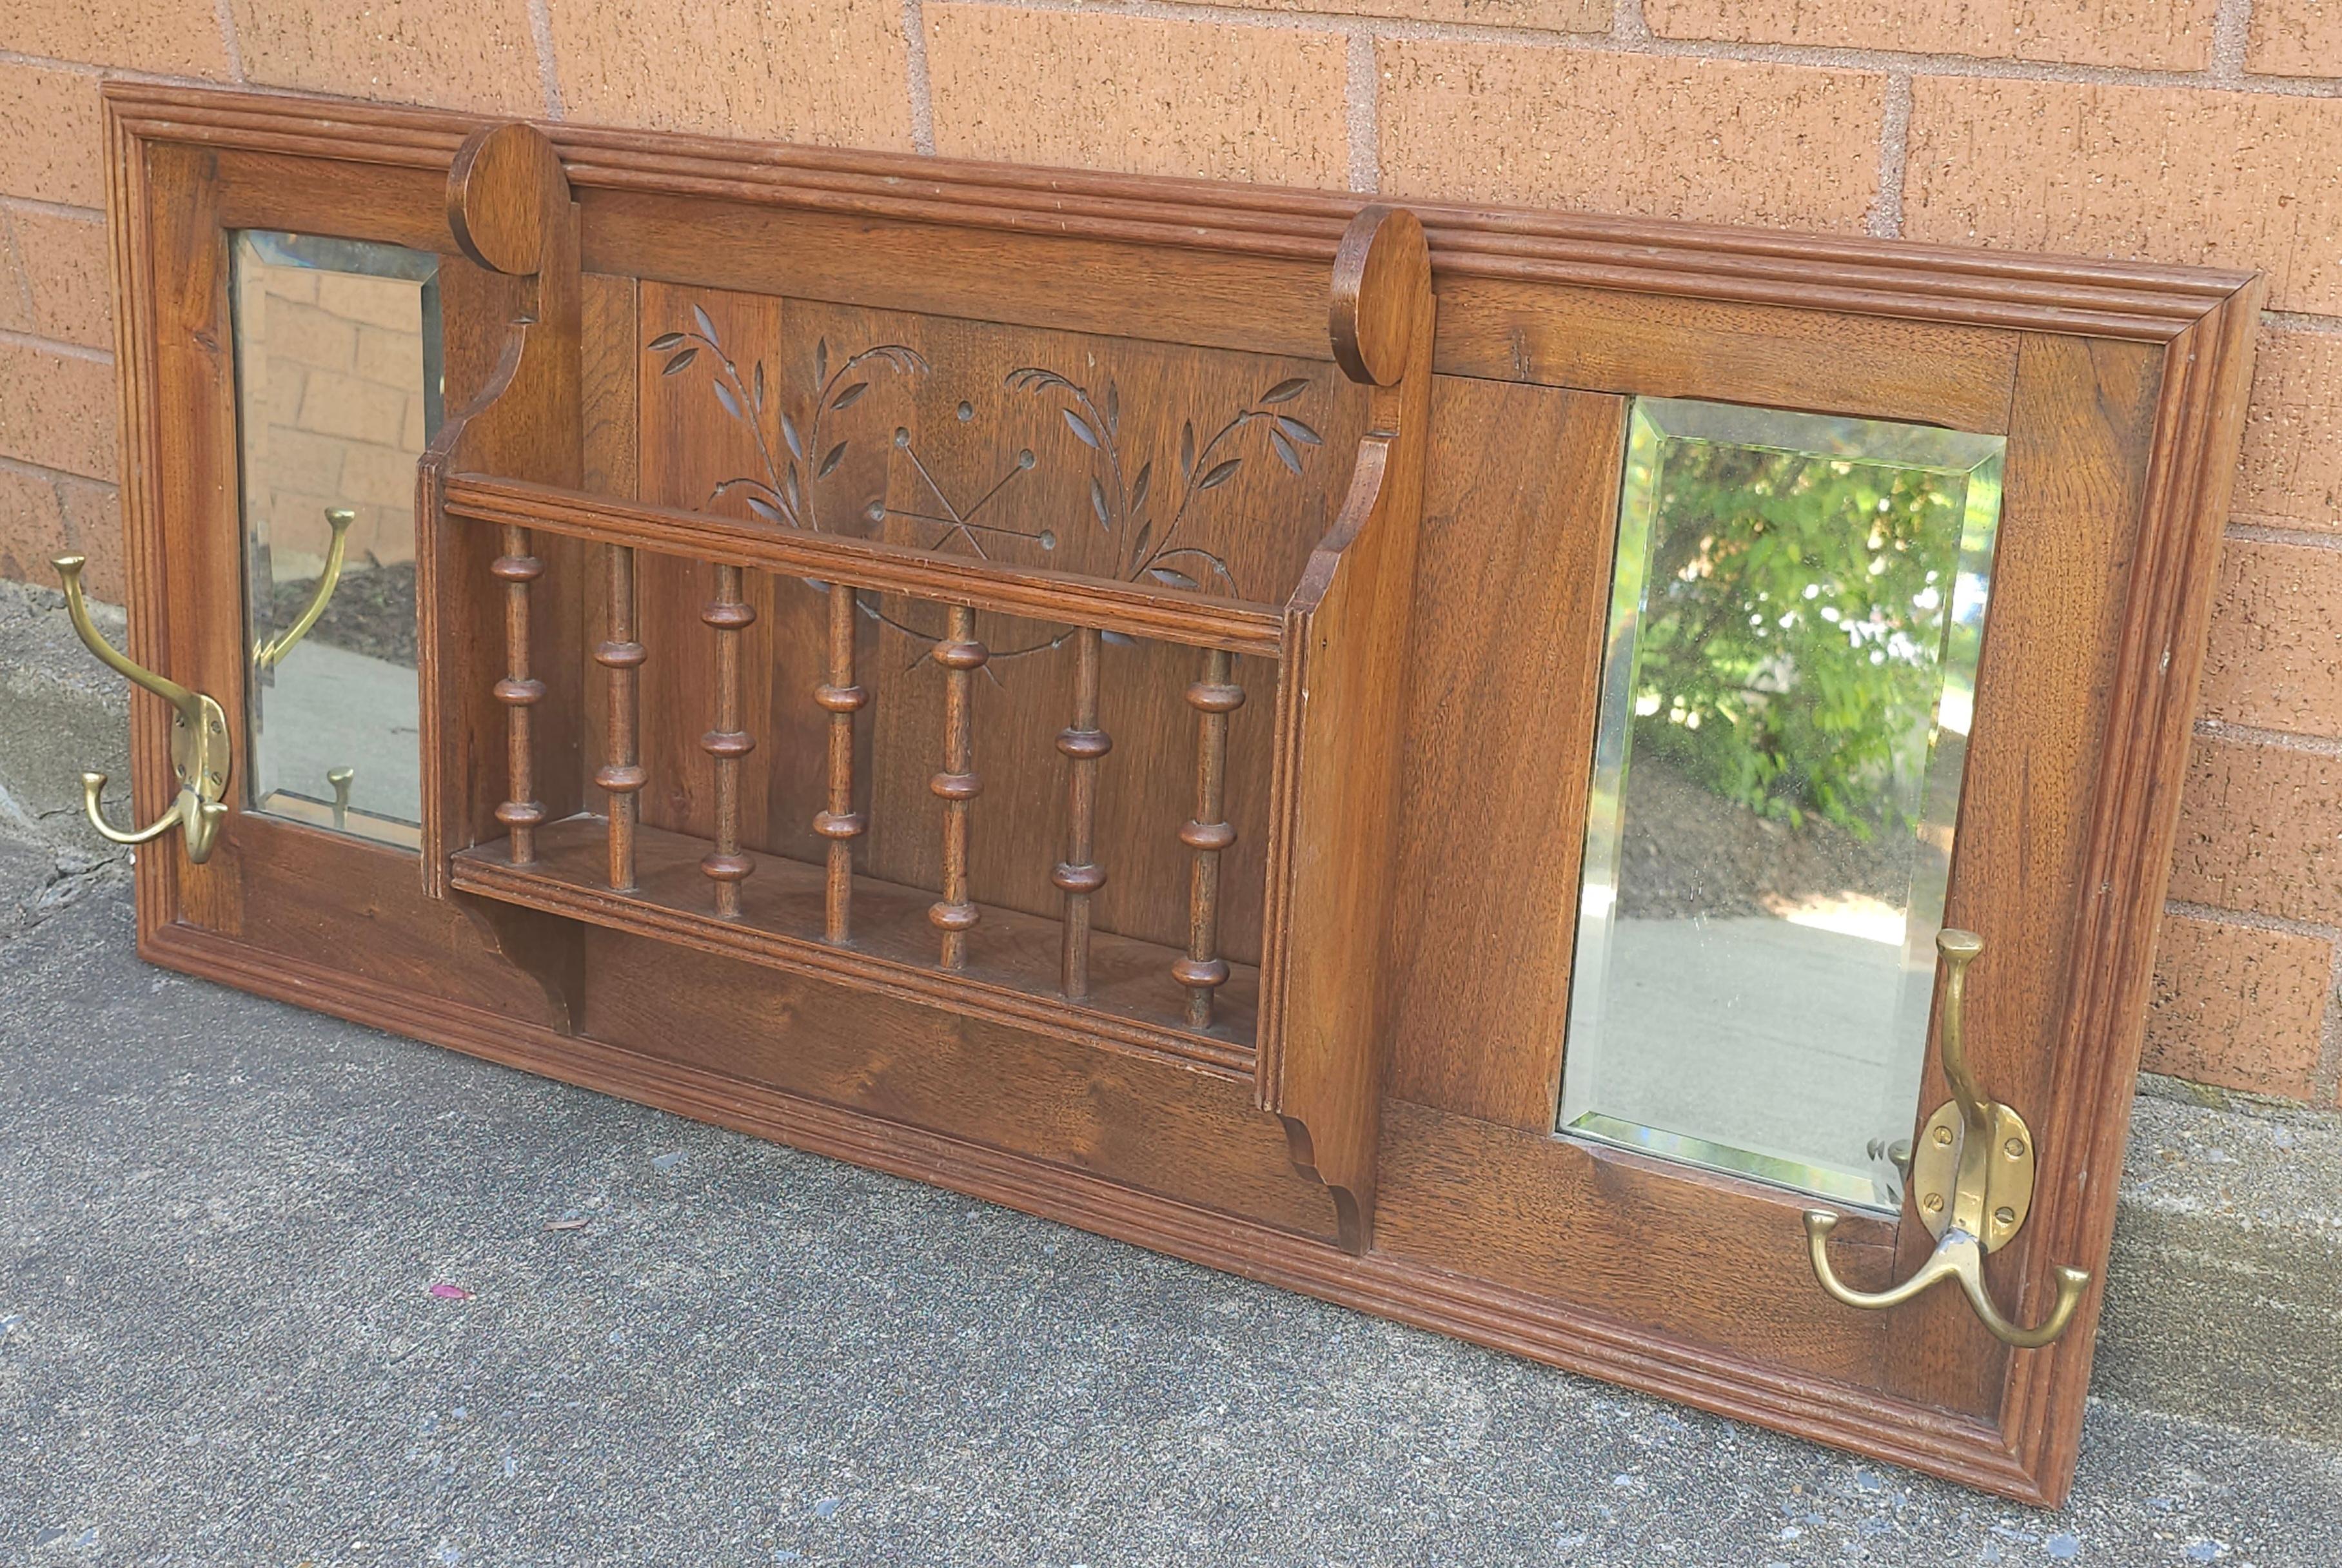 A Mid-20th Century Walnut Double bevel Mirrored Coat and Hat Rack with a Spindle Storage Slot. Measures 39